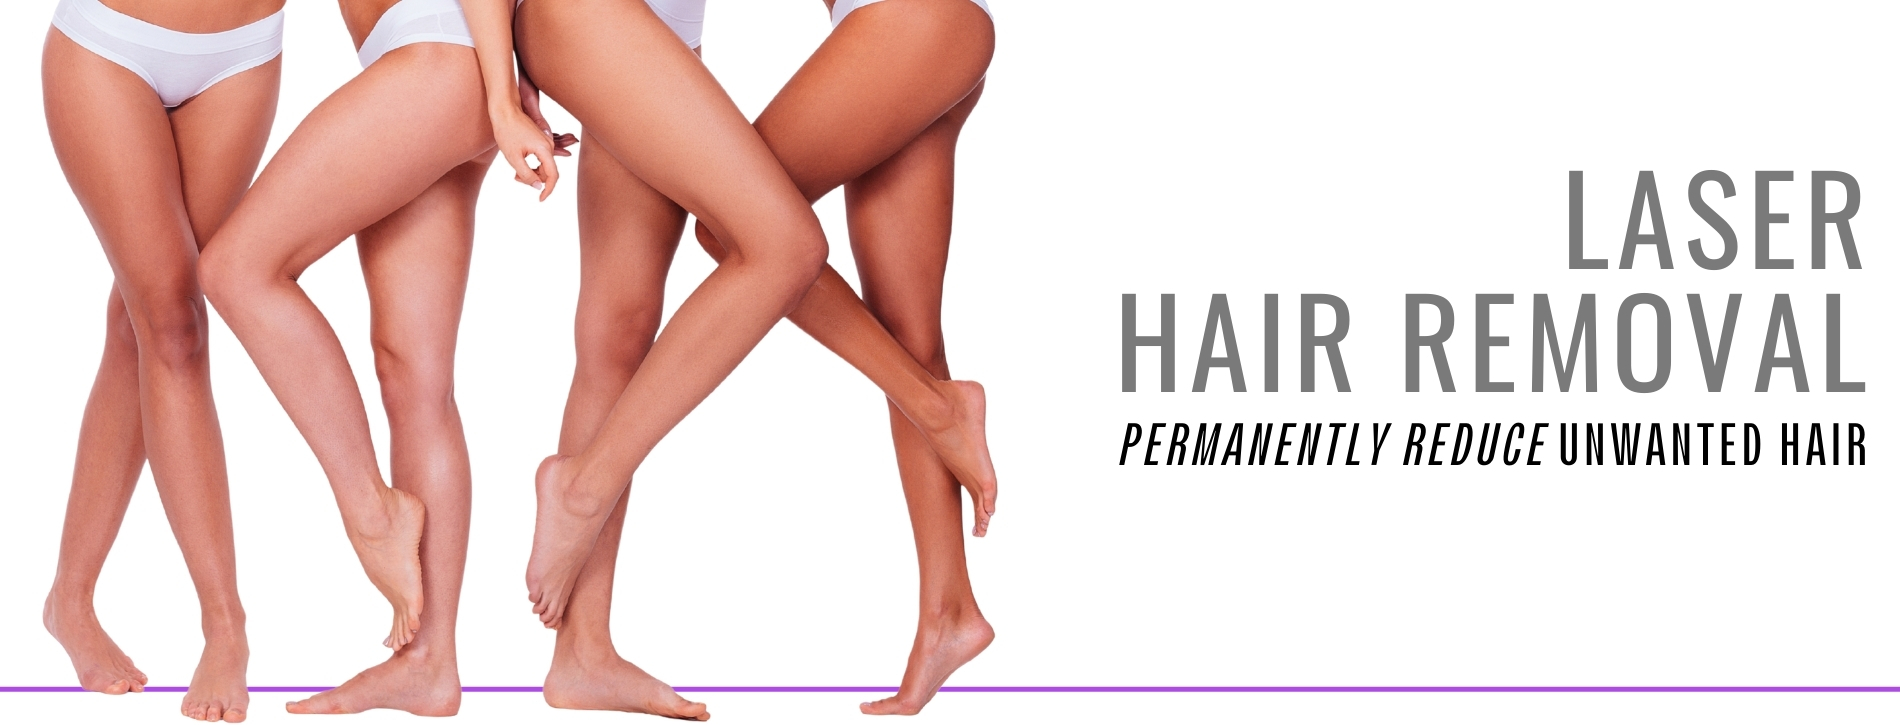 The legs of four women with different skin types, showing smooth and effective results from Laser Hair Removal.